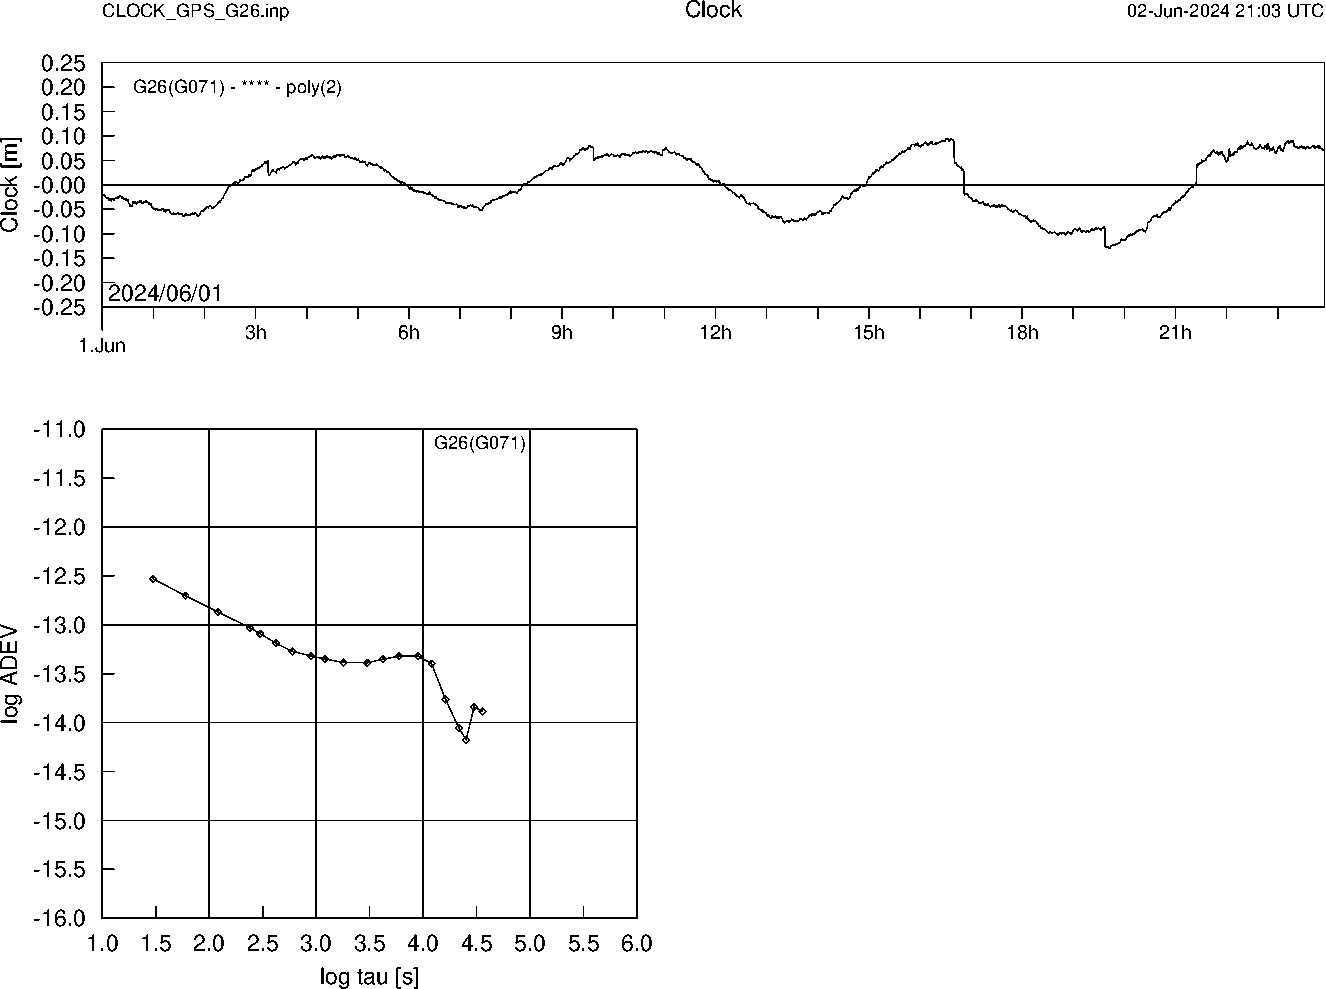 GPS G26 Clock Time Series and Allan Deviation